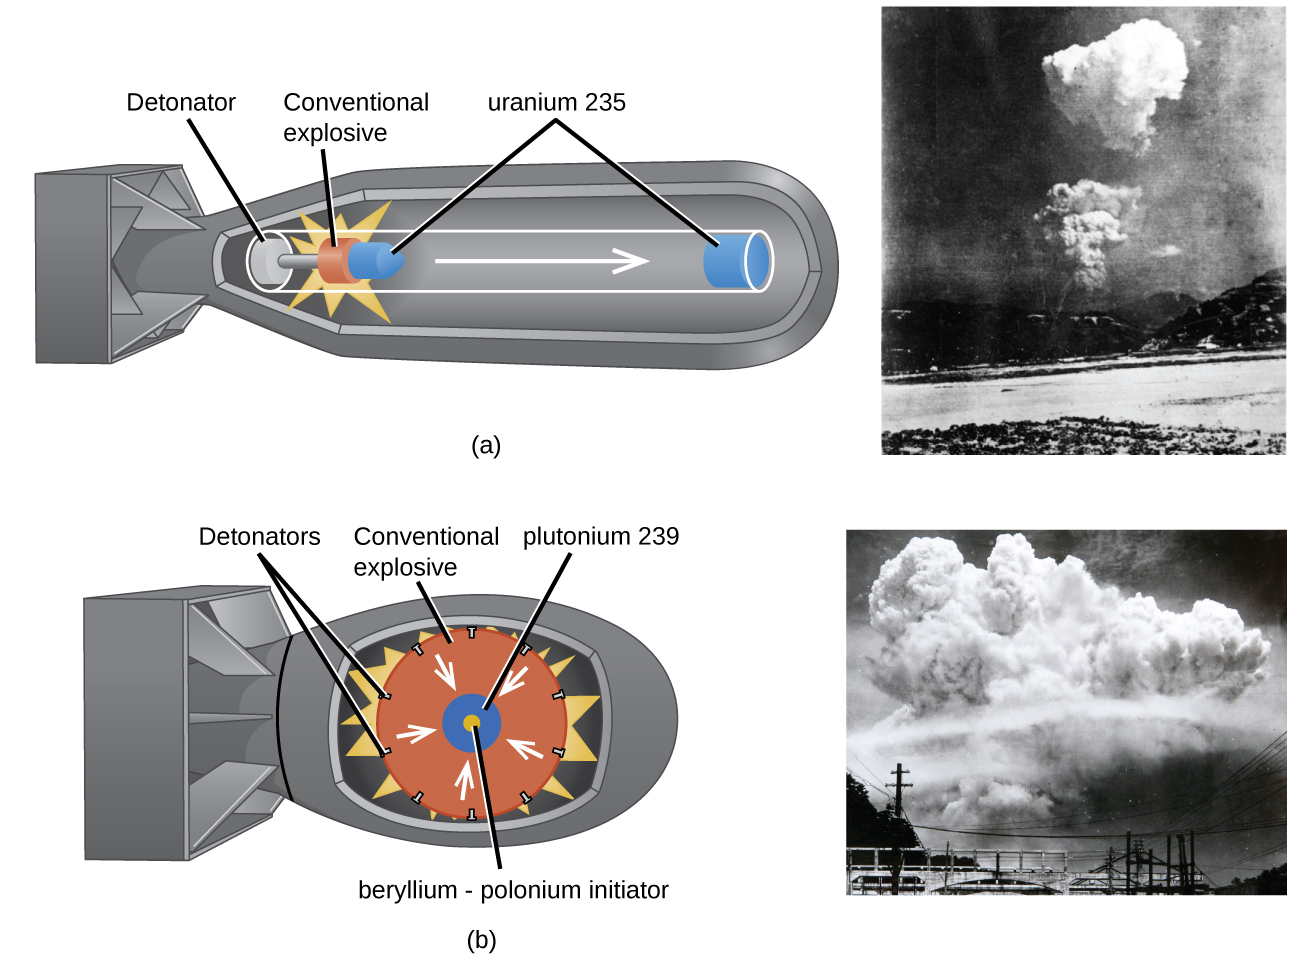 Two diagrams are shown, each to the left of a photo, and labeled “a” and “b.” Diagram a shows the outer casing of a bomb that has a long, tubular shape with a squared-off tail. Components in the shell show a tube with a white disk labeled “Detonator” on the left, an orange disk with a bright yellow starburst drawn around it labeled “Conventional explosive” in the middle and a right-facing arrow leading to a blue disk in the nose of the bomb labeled “uranium 235.” A small blue cone next to the orange disk is shares the label of “uranium 235.” A black and white photo next to this diagram shows a far-off shot of a rising cloud over a landscape. Diagram b shows the outer casing of a bomb that has a short, rounded shape with a squared-off tail. Components in the shell show a large orange circle labeled “Conventional explosive” with a series of black dots around its edge, labeled “Detonators,” and a yellow starburst behind it. White arrows face from the outer edge of the orange circle to a blue circle in the center with a yellow core. The blue circle is labeled “plutonium 239” while the yellow core is labeled “beryllium, dash, polonium initiator.” A black and white photo next to this diagram shows a far-off shot of a giant rising cloud over a landscape.